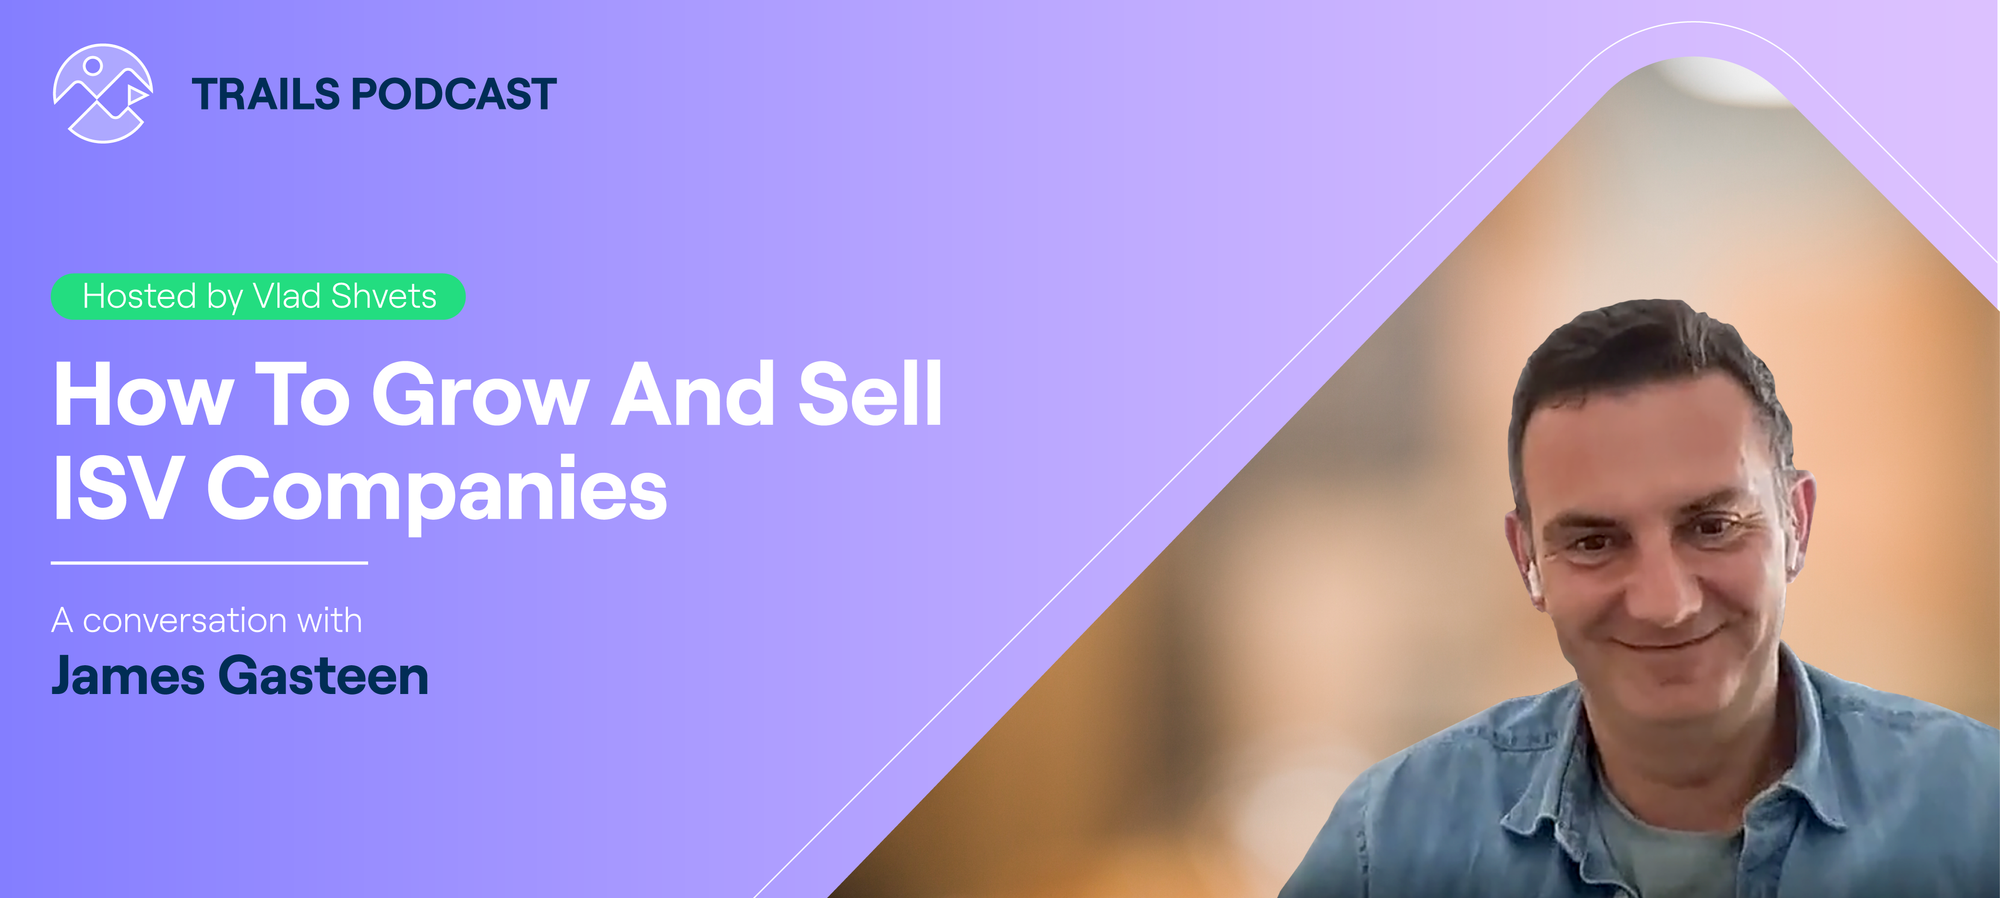 How To Grow And Sell Salesforce ISV Companies (Trails Podcast Episode #1 With James Gasteen)